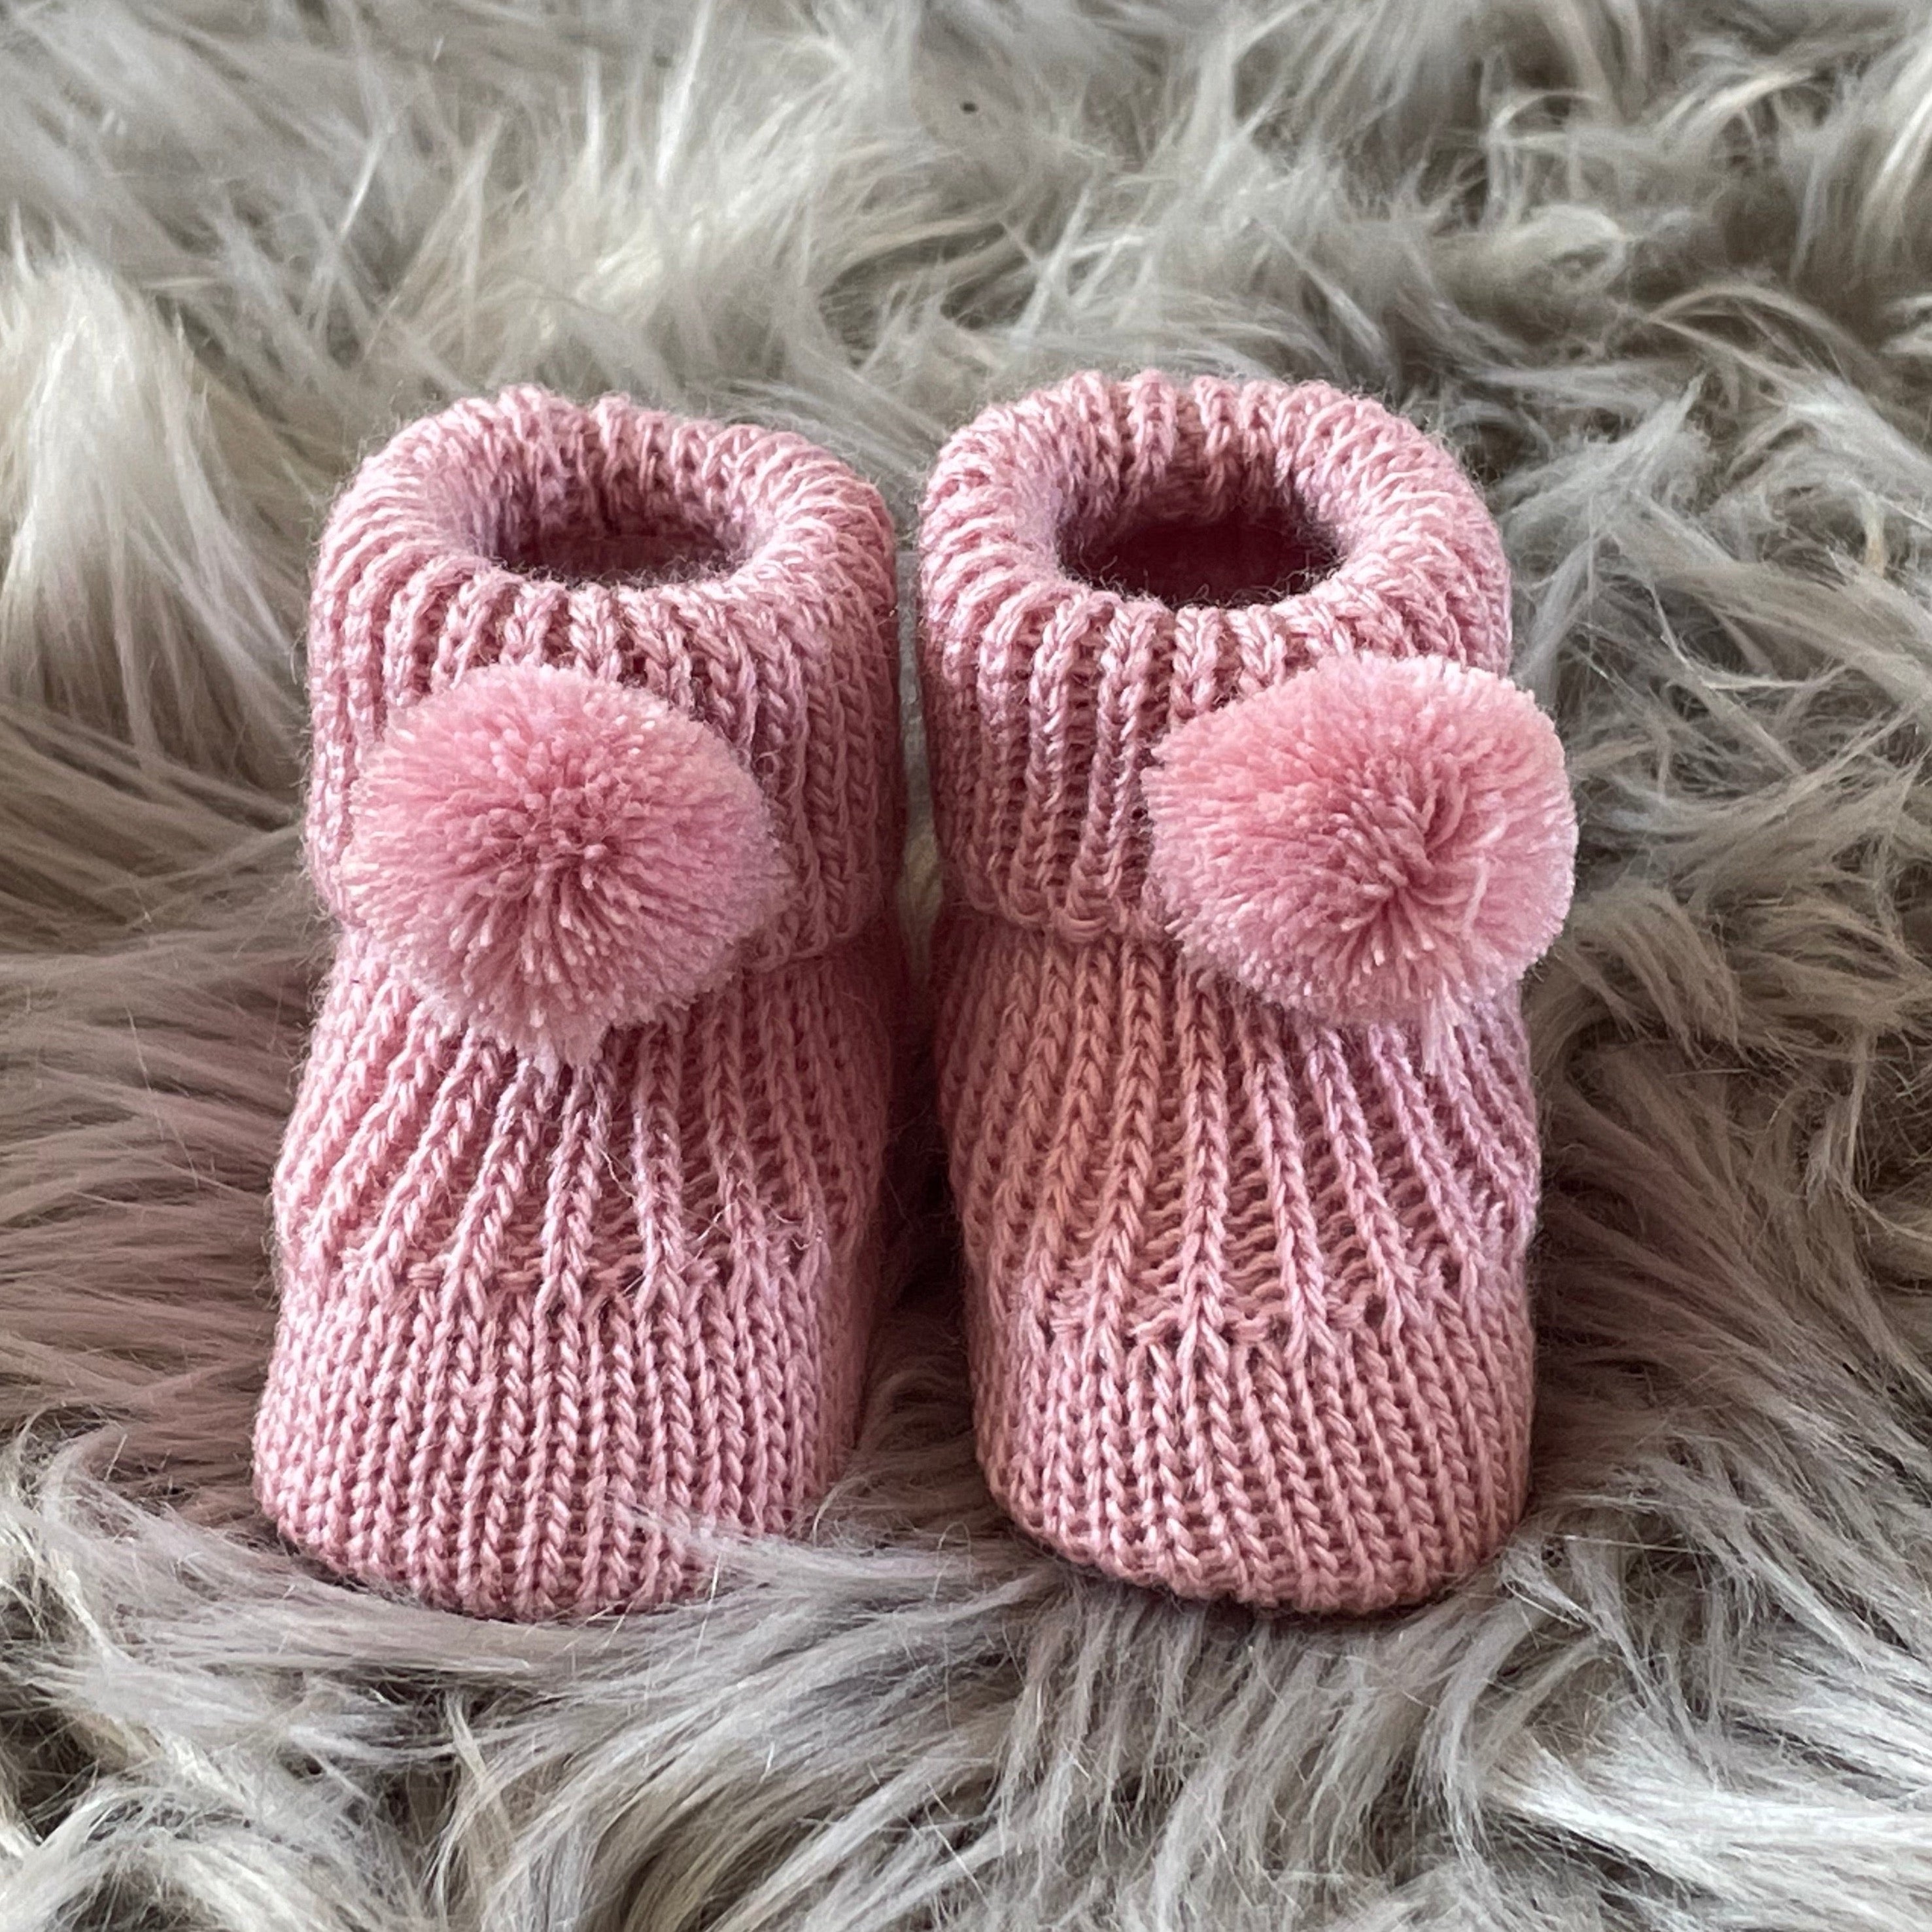 Dusty Pink knitted baby booties